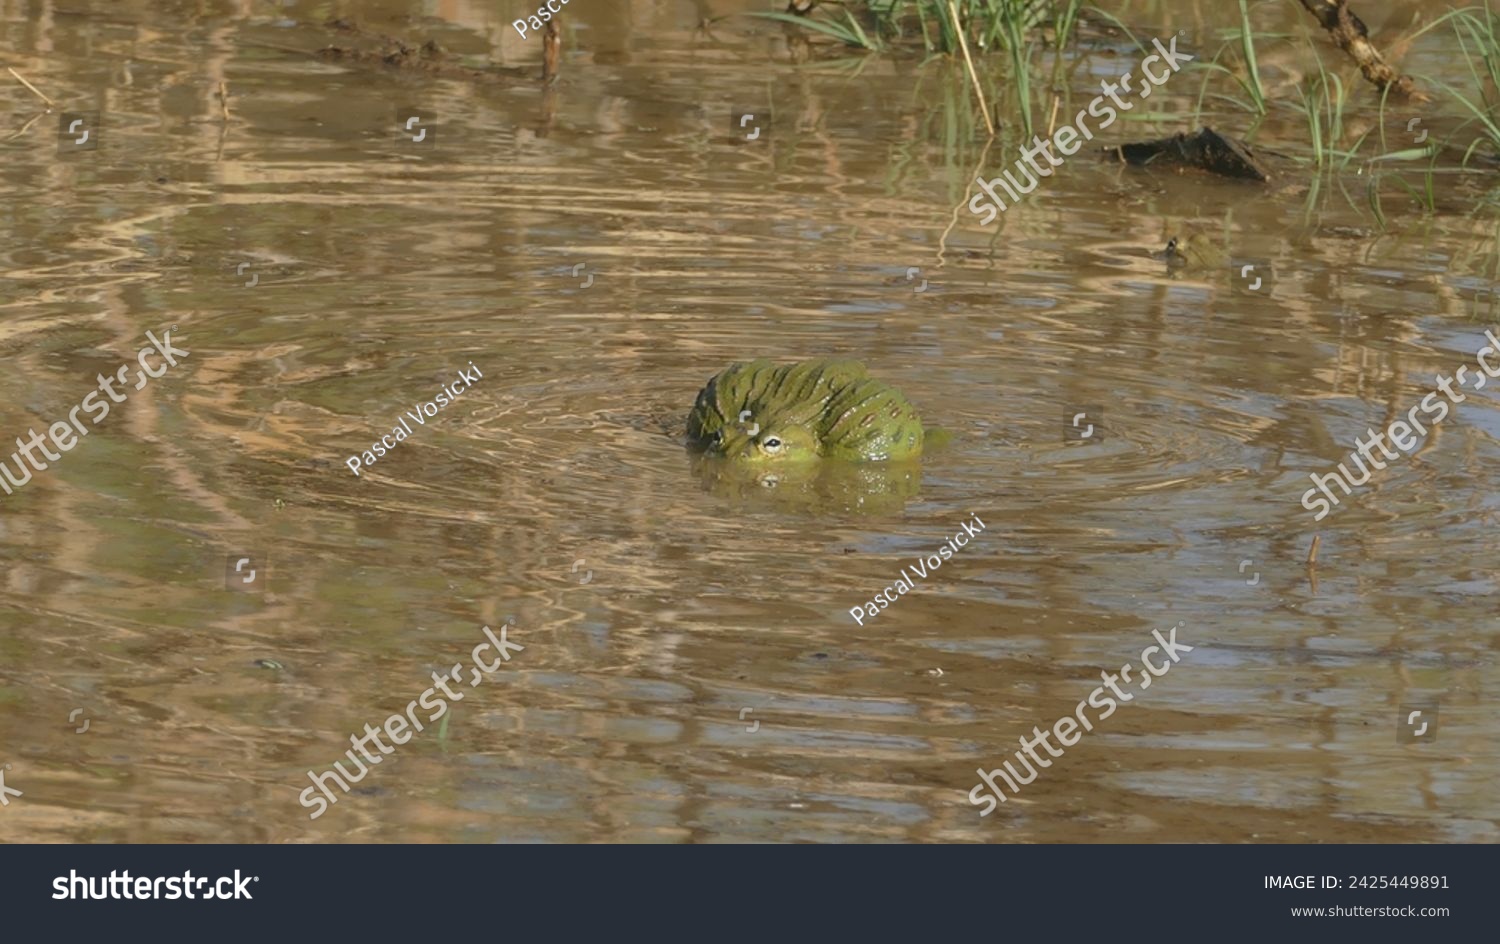 Erindi Private Game Reserve in Namibia : South African giant bullfrog Pyxicephalus adspersus in a pond - lone male croaking and blown up #2425449891